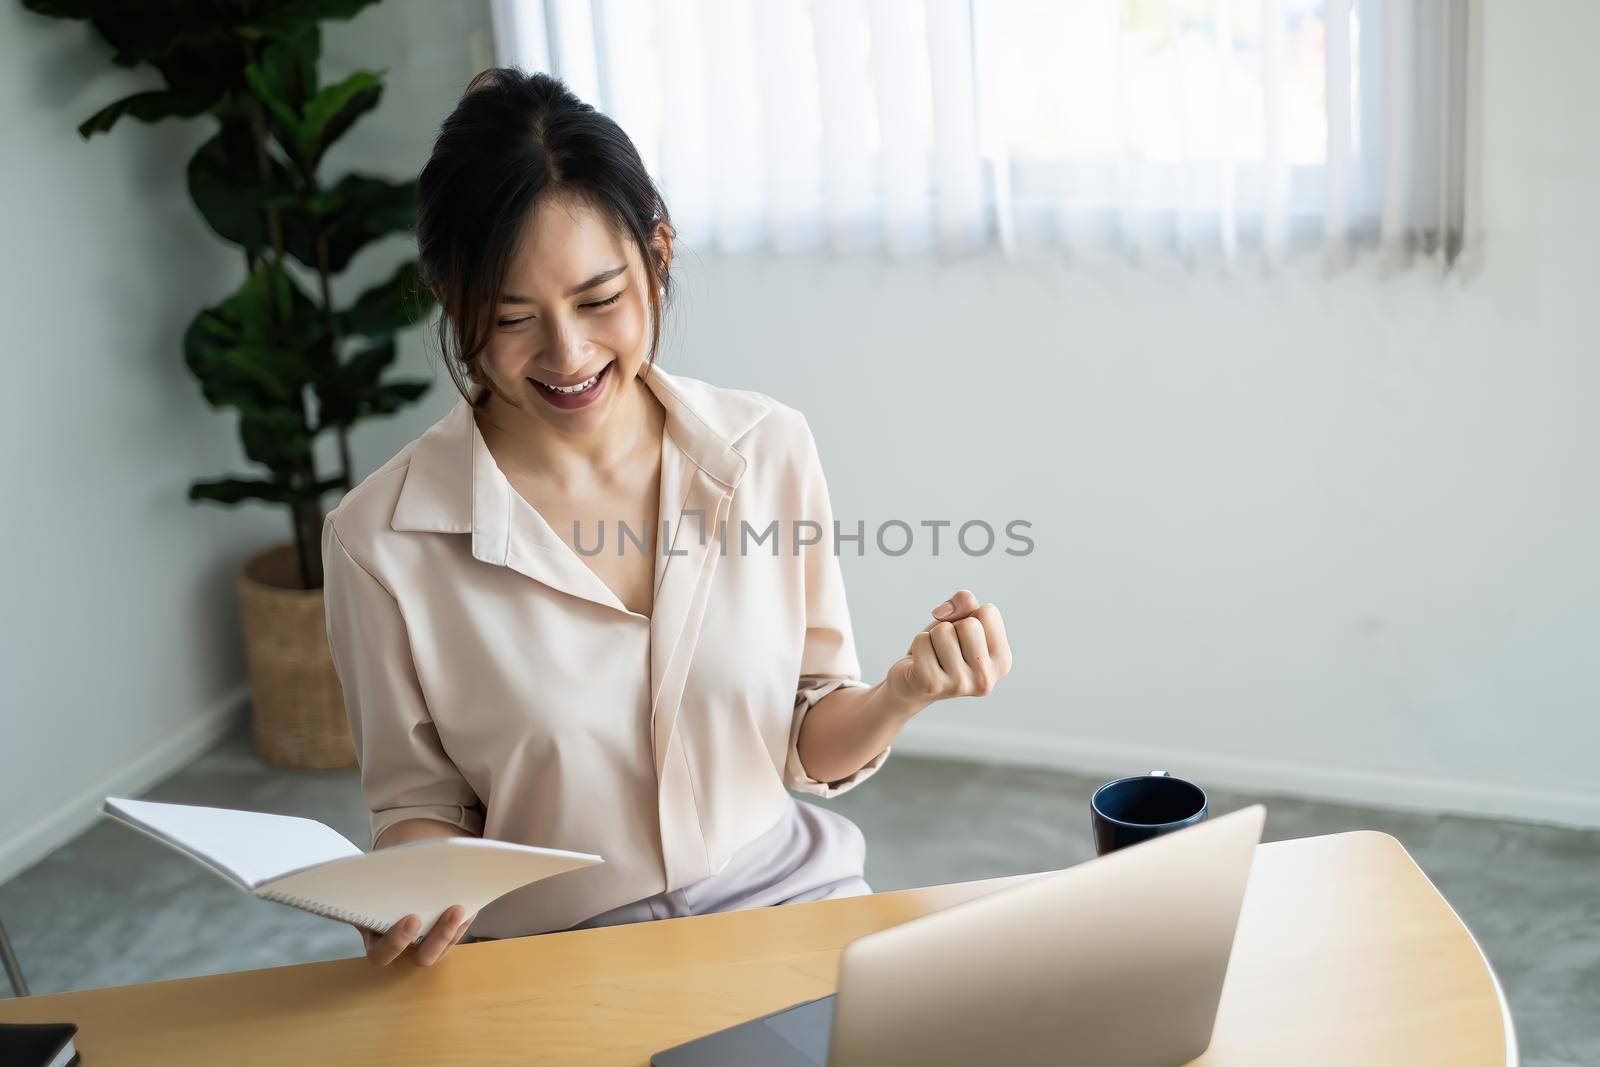 Joyful of Business female in conference together in an office and excited the success on laptop computer screen